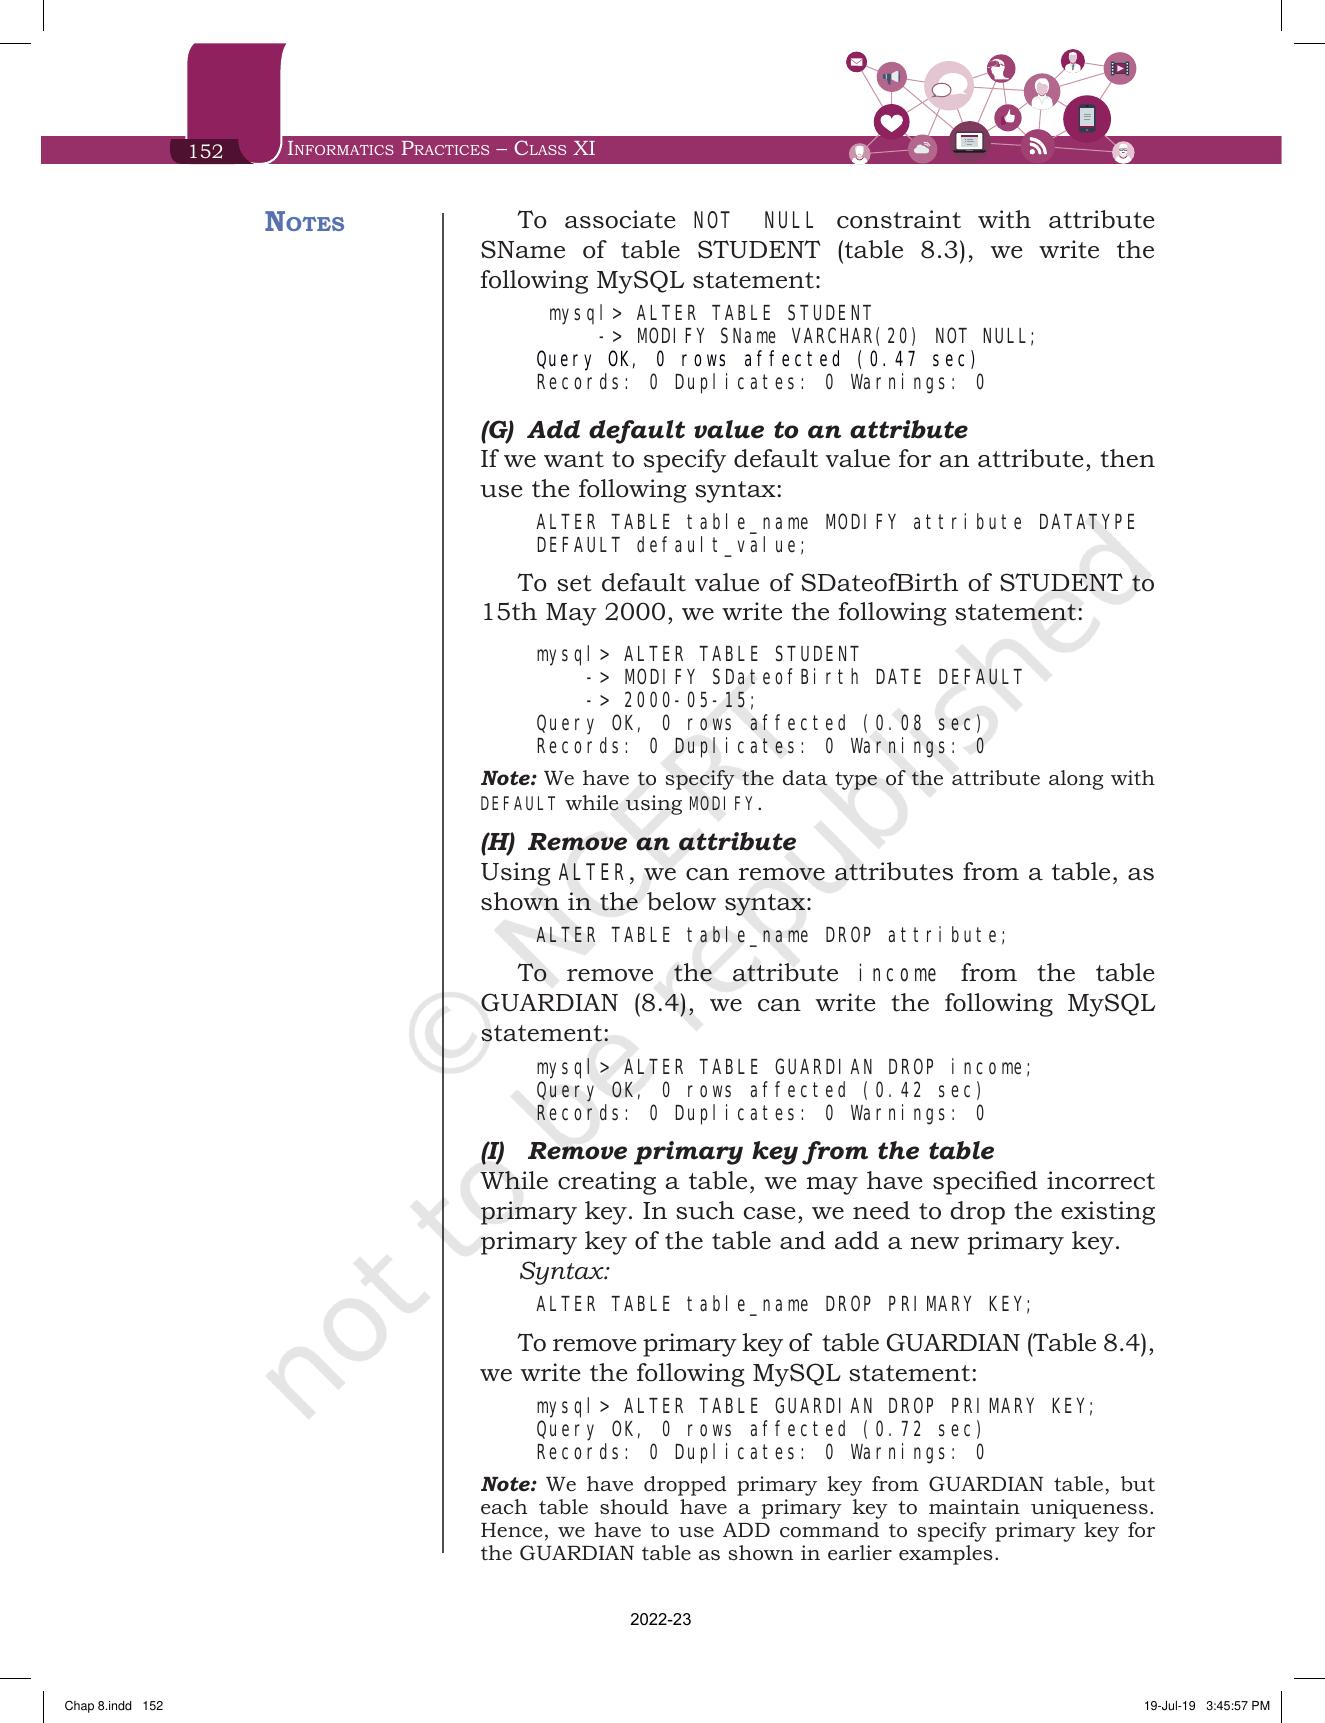 NCERT Book for Class 11 Informatics Practices Chapter 8 Introduction to Structured Query Language (SQL) - Page 10